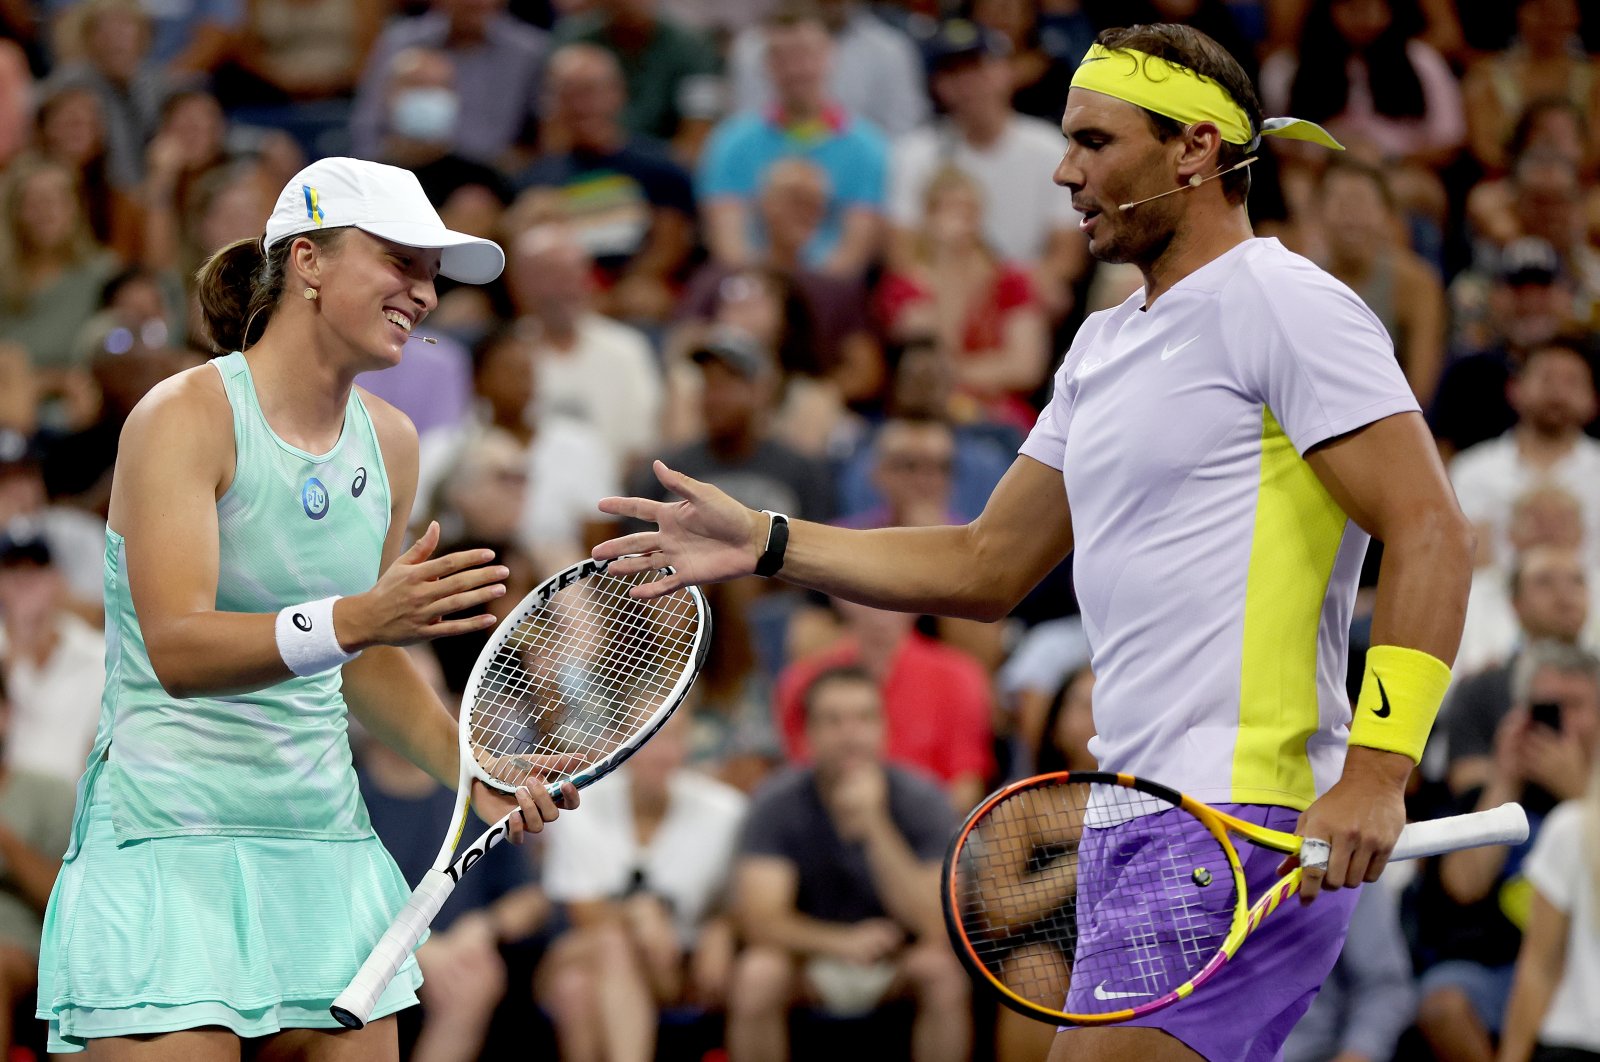 Poland&#039;s Iga Swiatek and Spain&#039;s Rafael Nadal celebrate a point against John McEnroe and Coco Gauff during the Tennis Plays For Peace exhibition matches to benefit Ukraine, at USTA Billie Jean King National Tennis Center, New York City, U.S., Aug. 24, 2022. (Getty Images Photo)